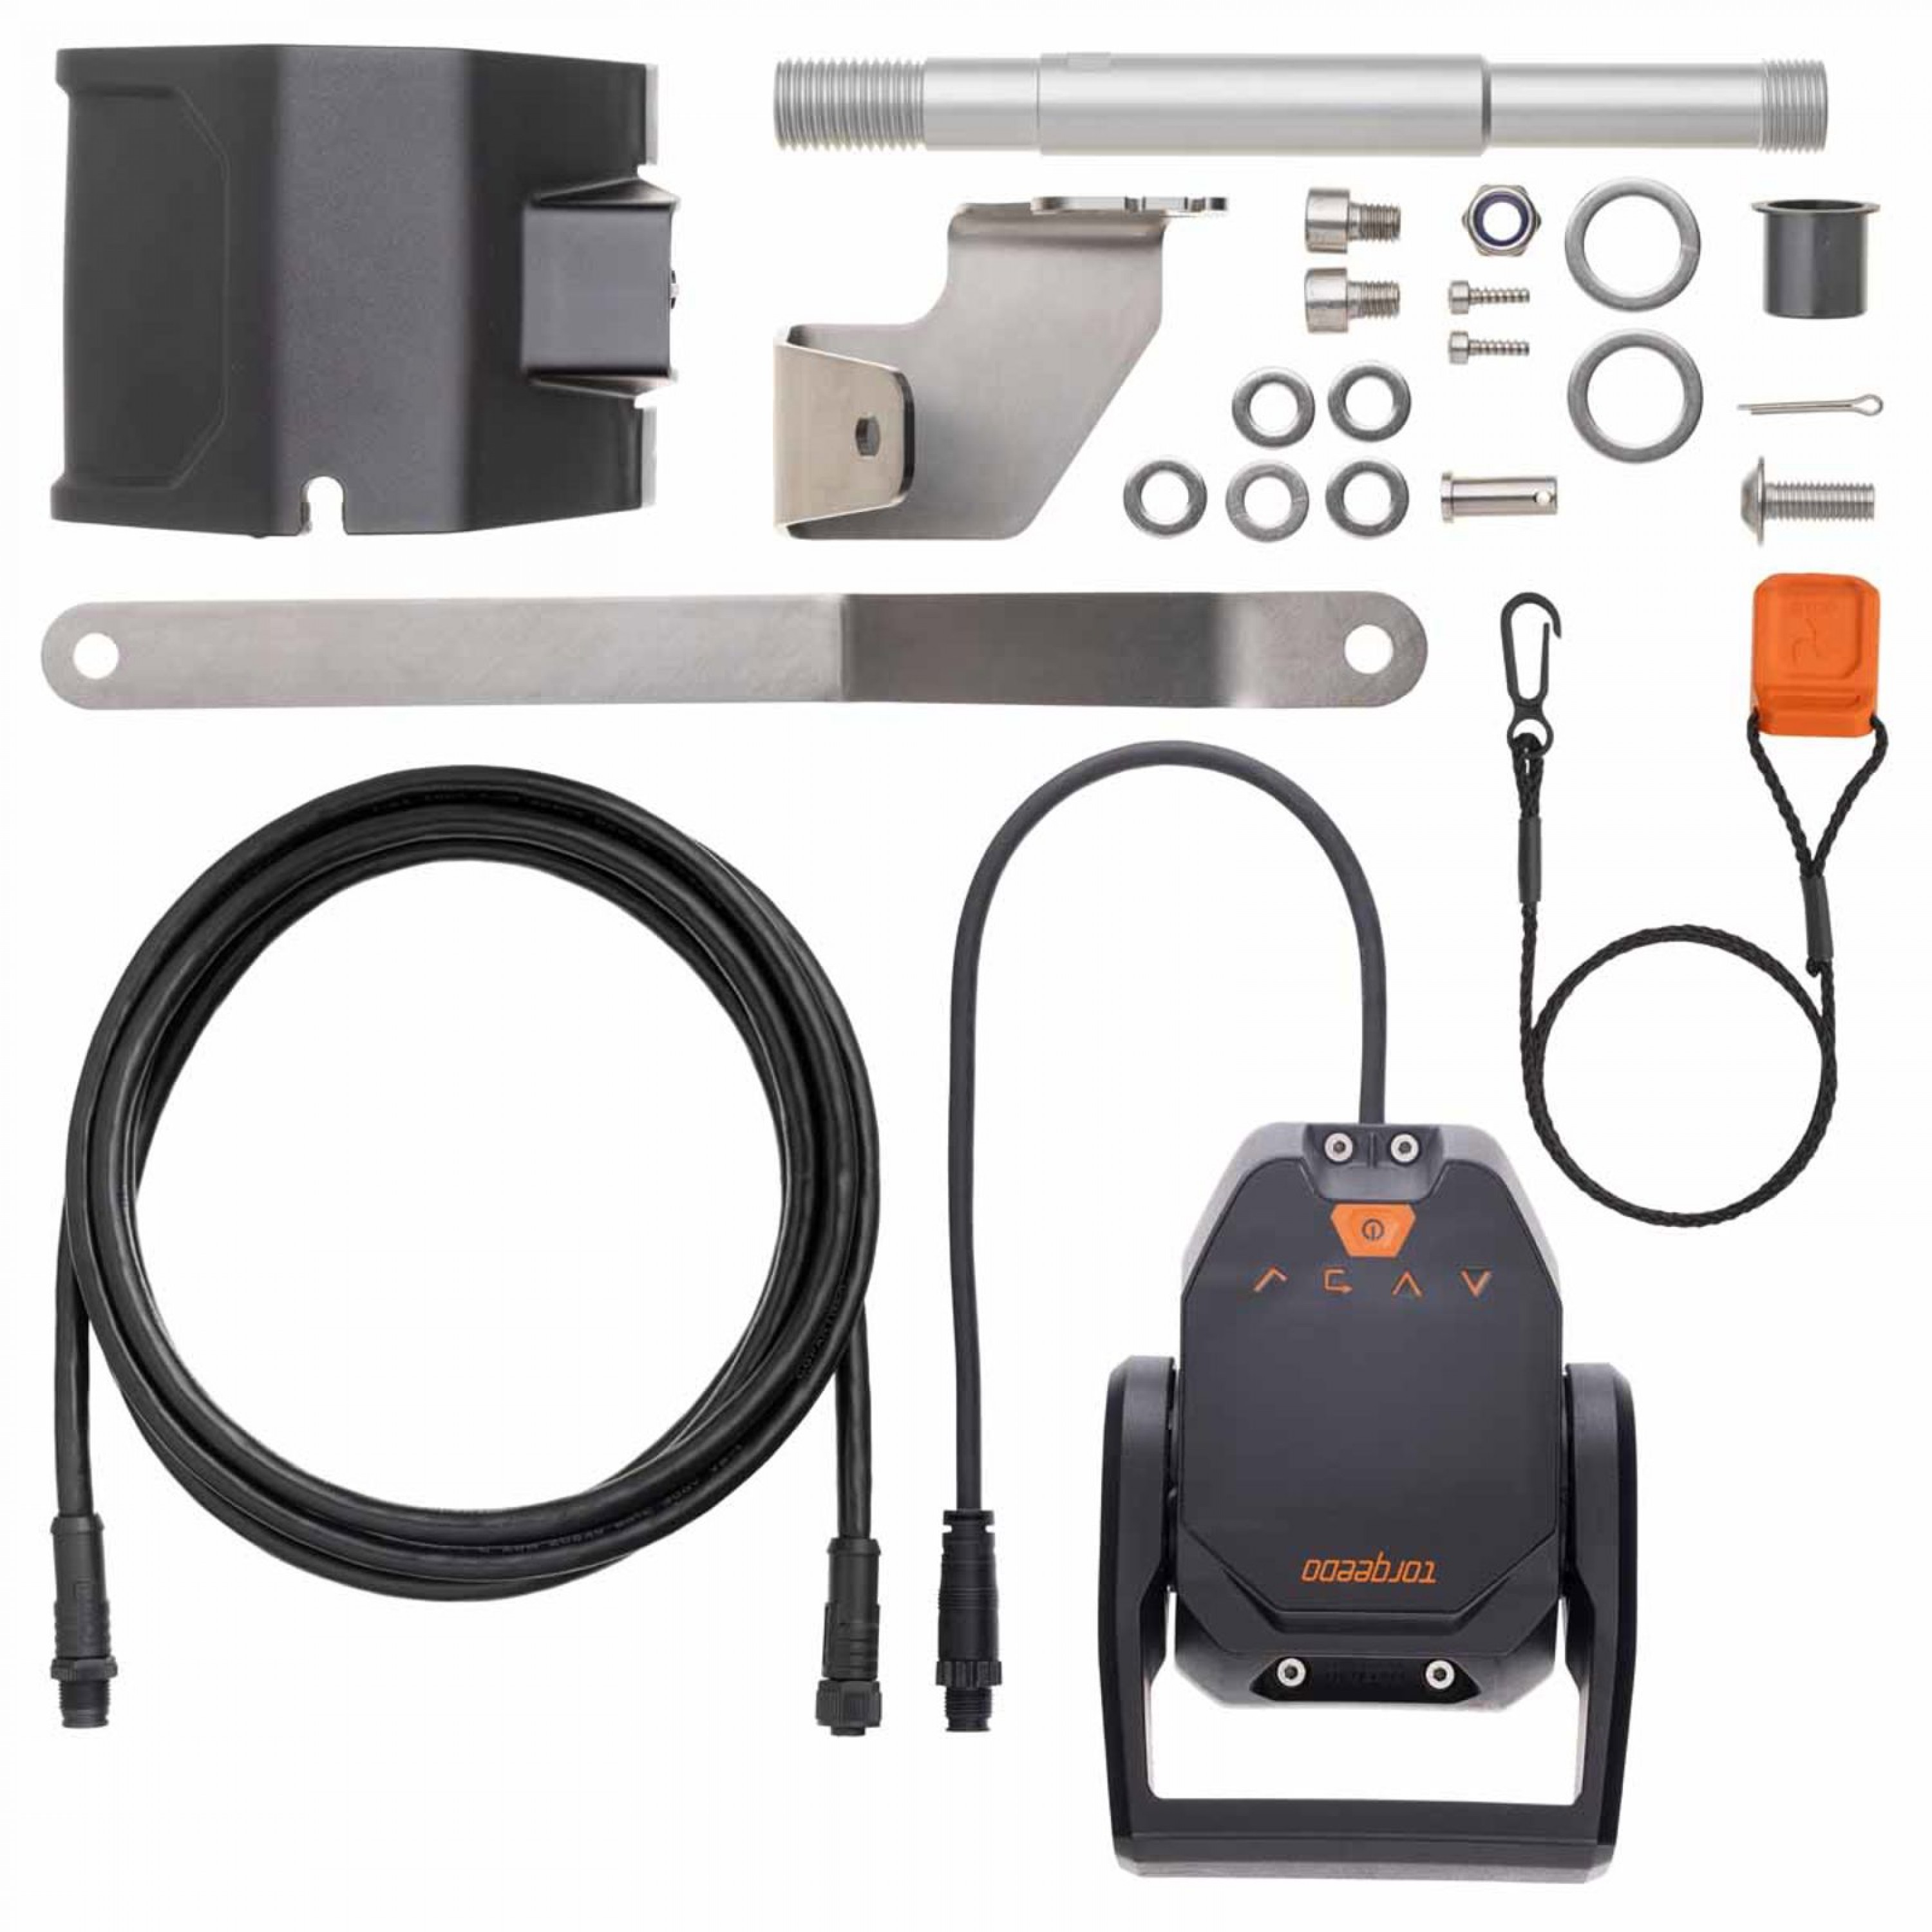 REMOTE KIT FOR NEW TRAVEL, INCLUDES THROTTLE 1976-00 PLUS TUBE FOR TELEFEX, STEERING LINK ARM